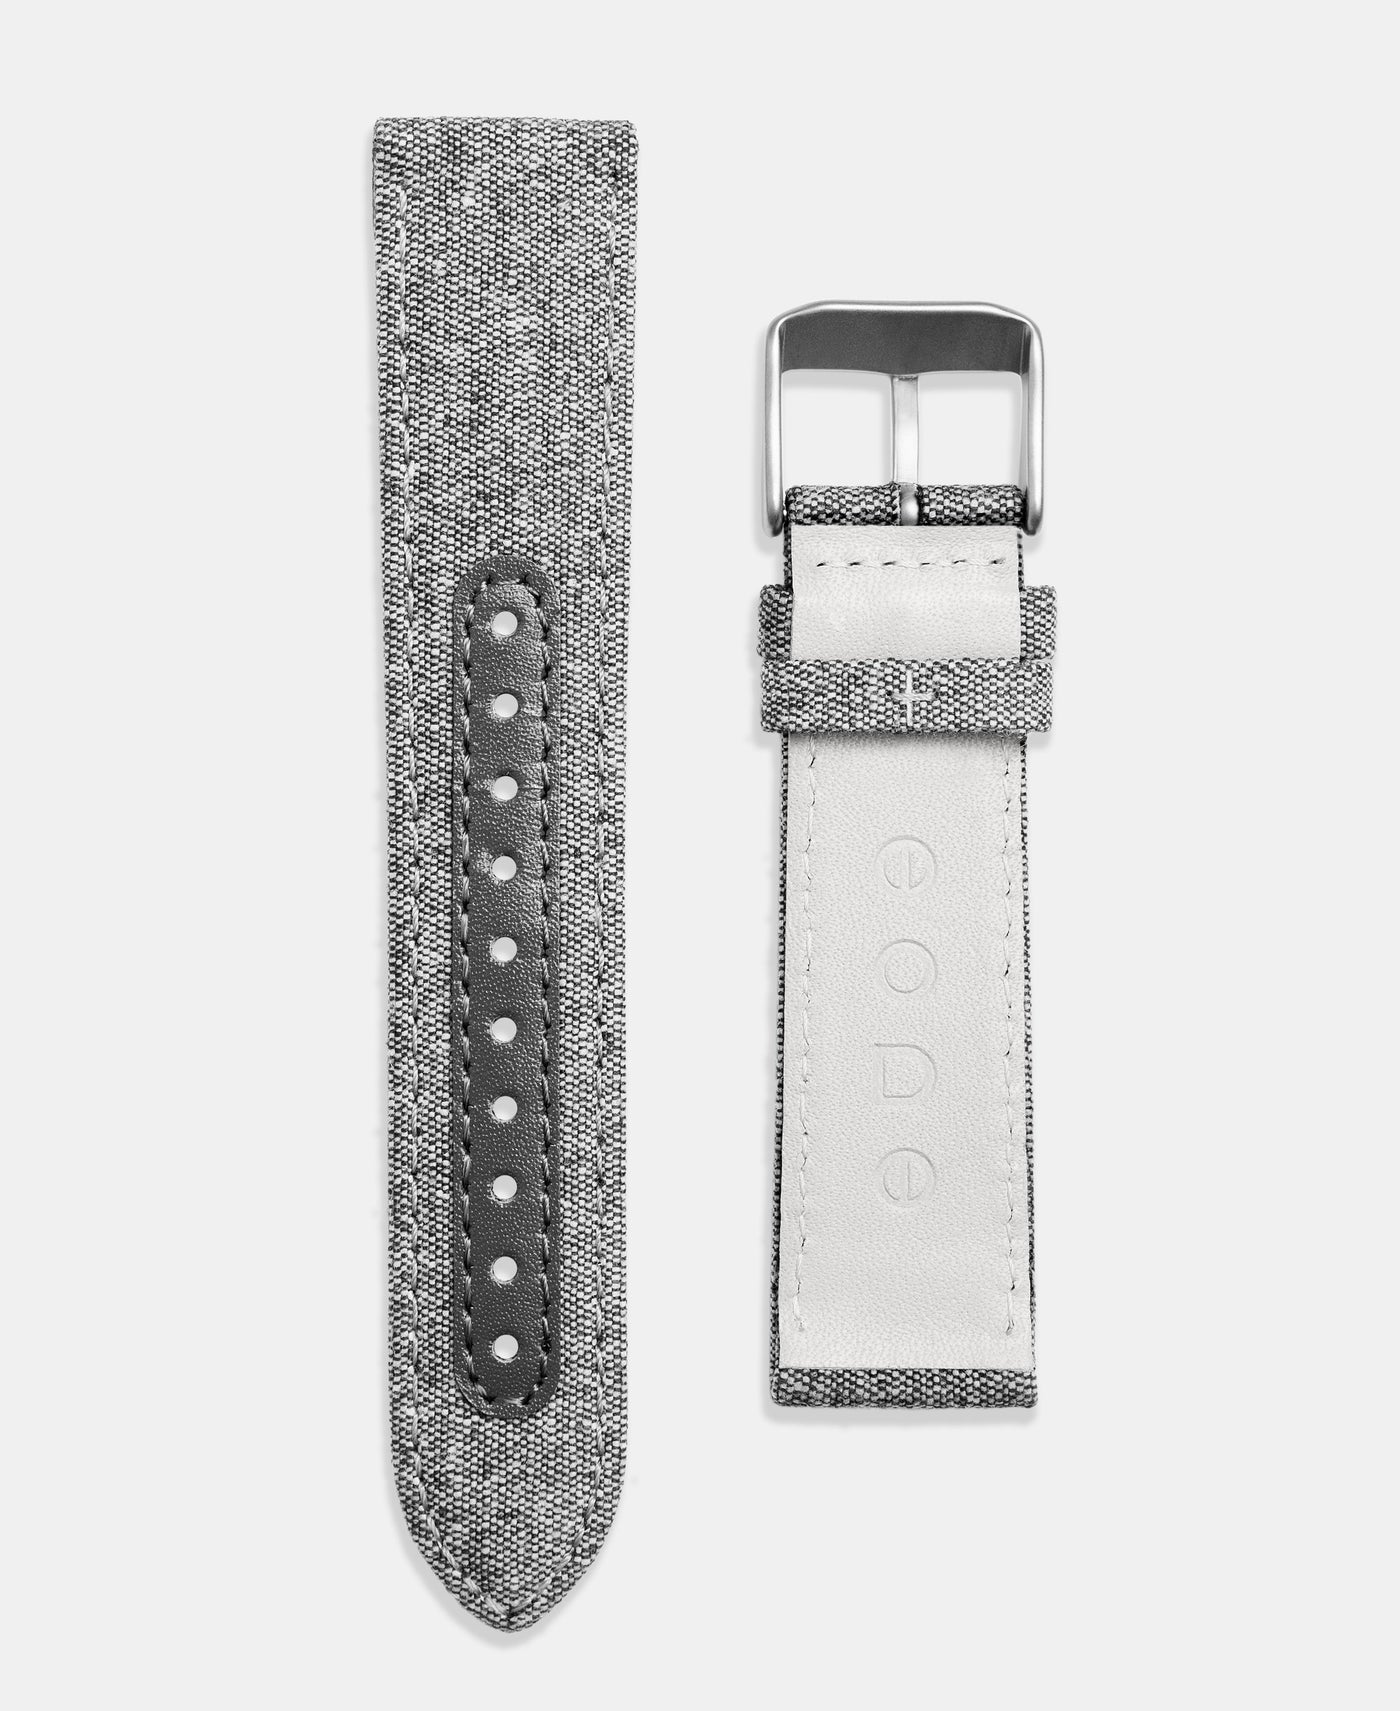 A photo shows the strap lying on a flat surface. One part has a buckle and the other part has a series of holes for an adjustable fit.